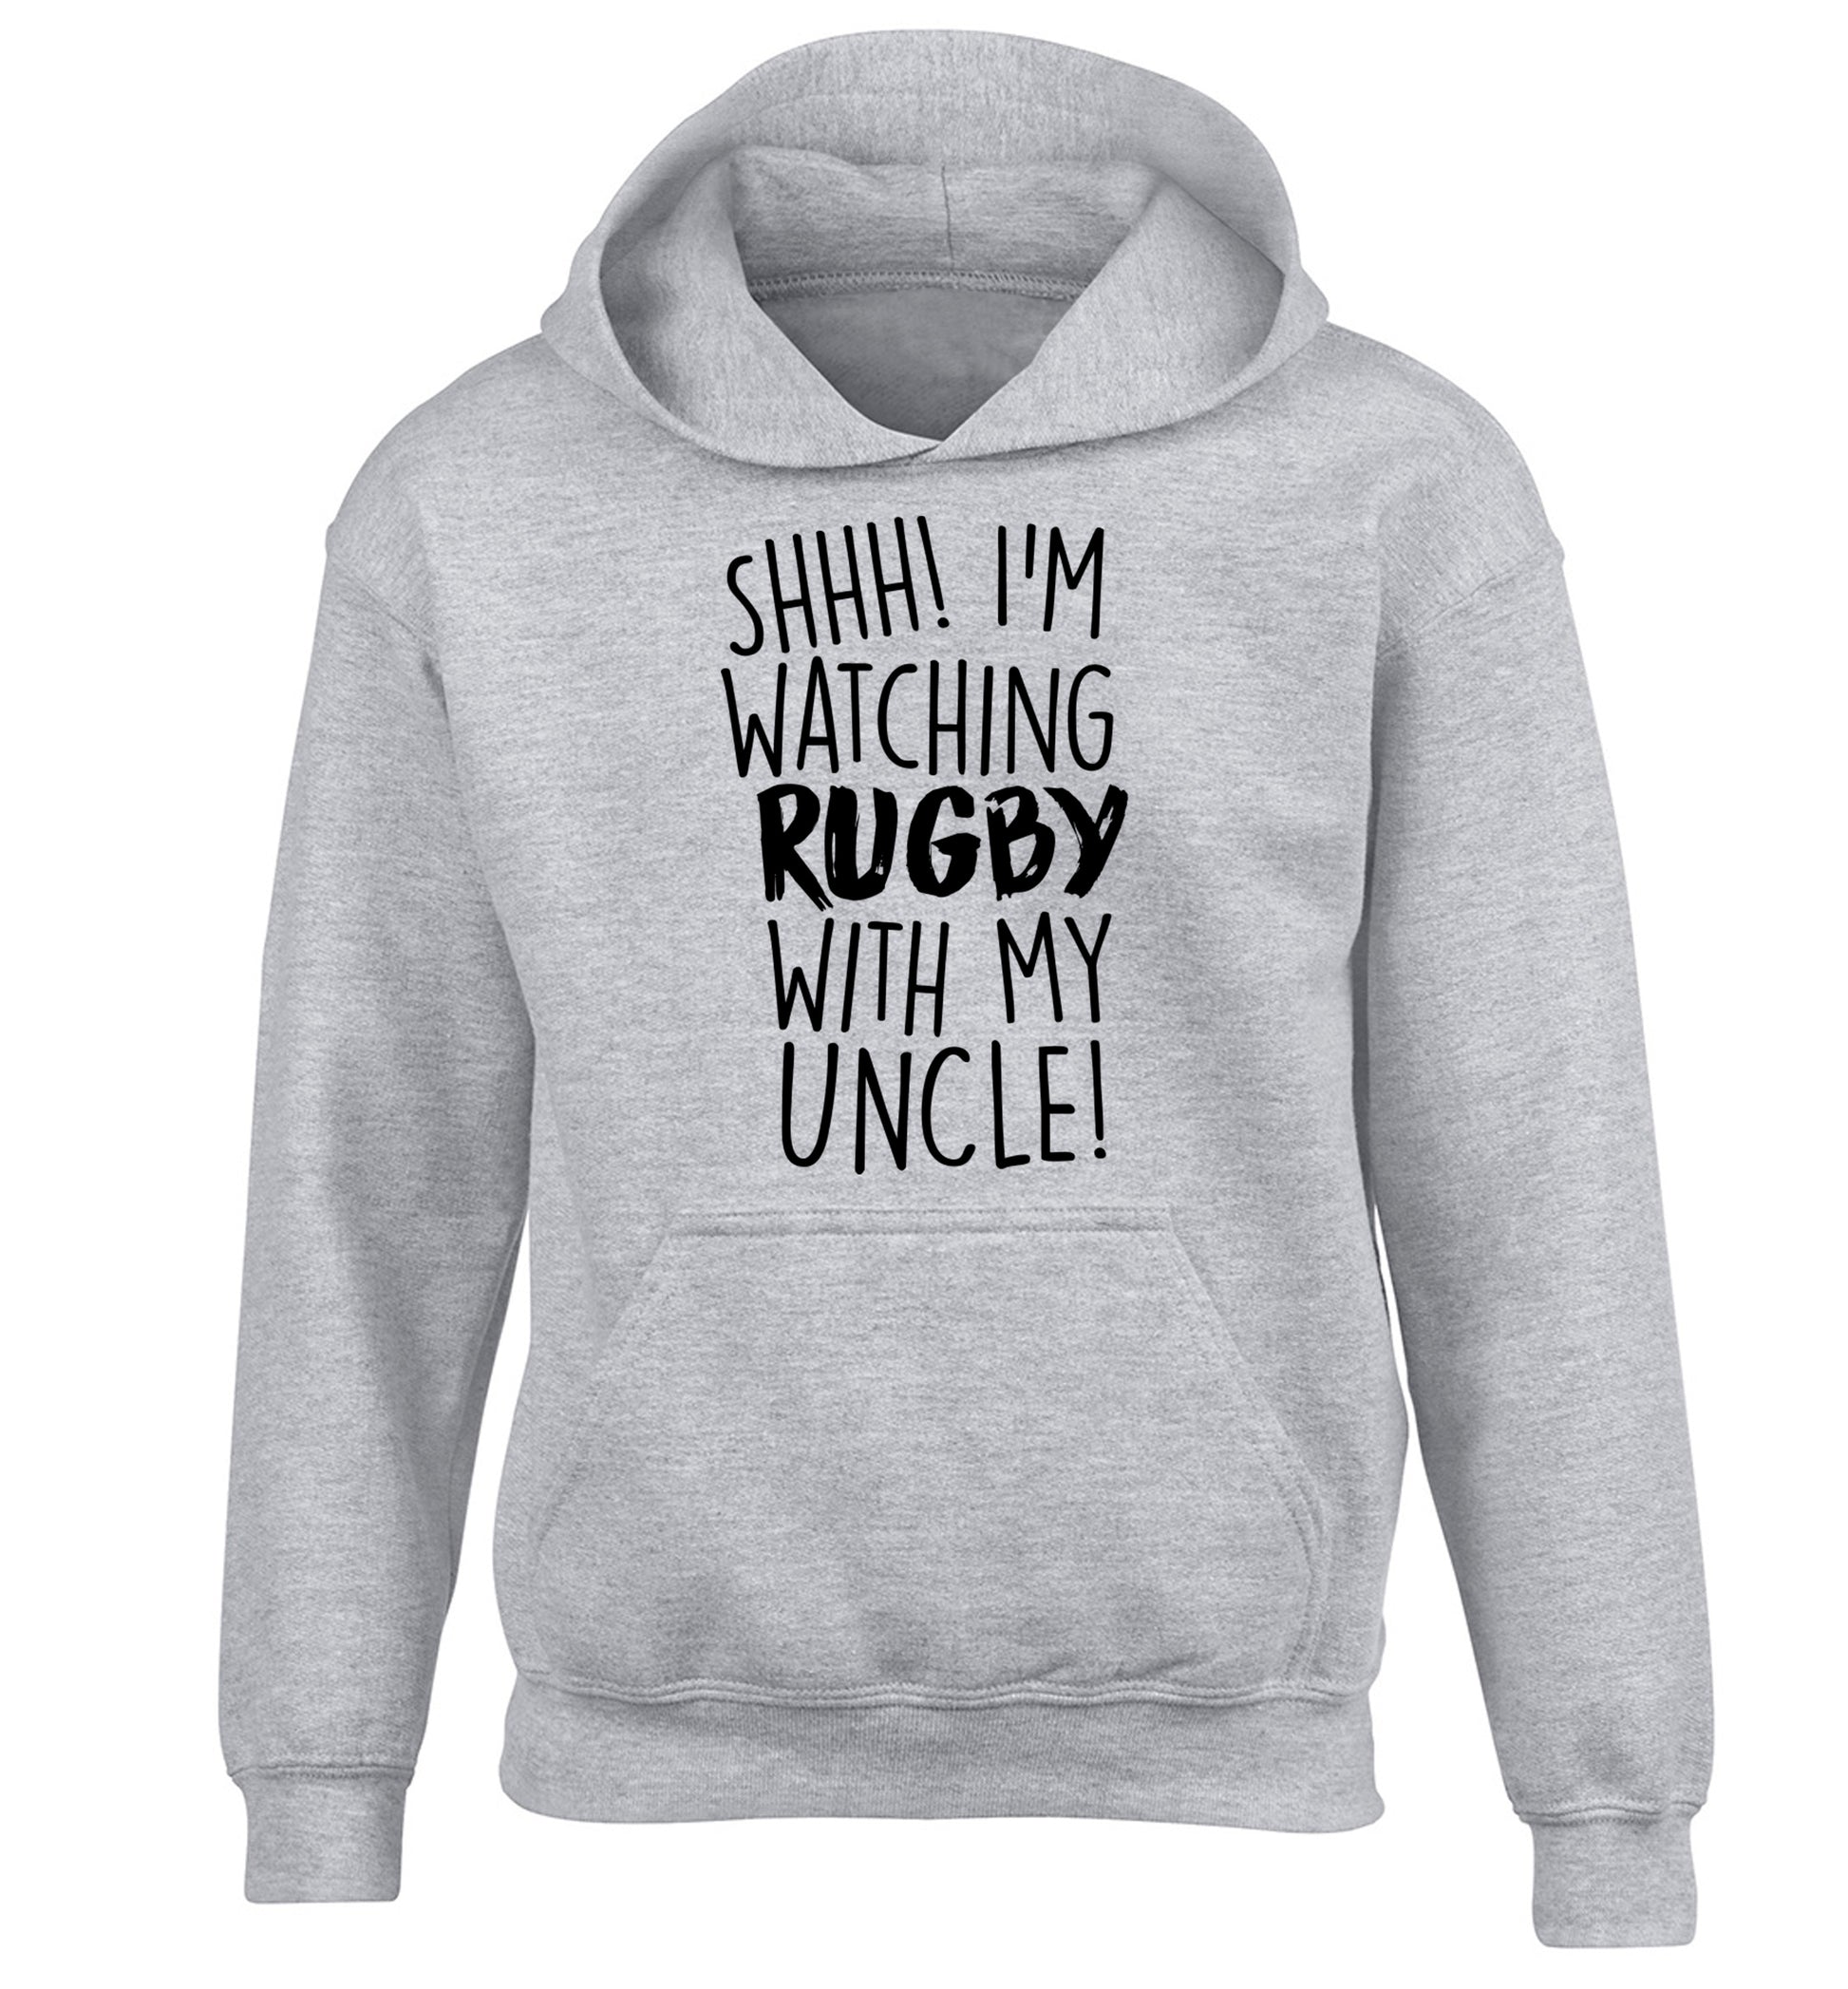 Shh.. I'm watching rugby with my uncle children's grey hoodie 12-13 Years